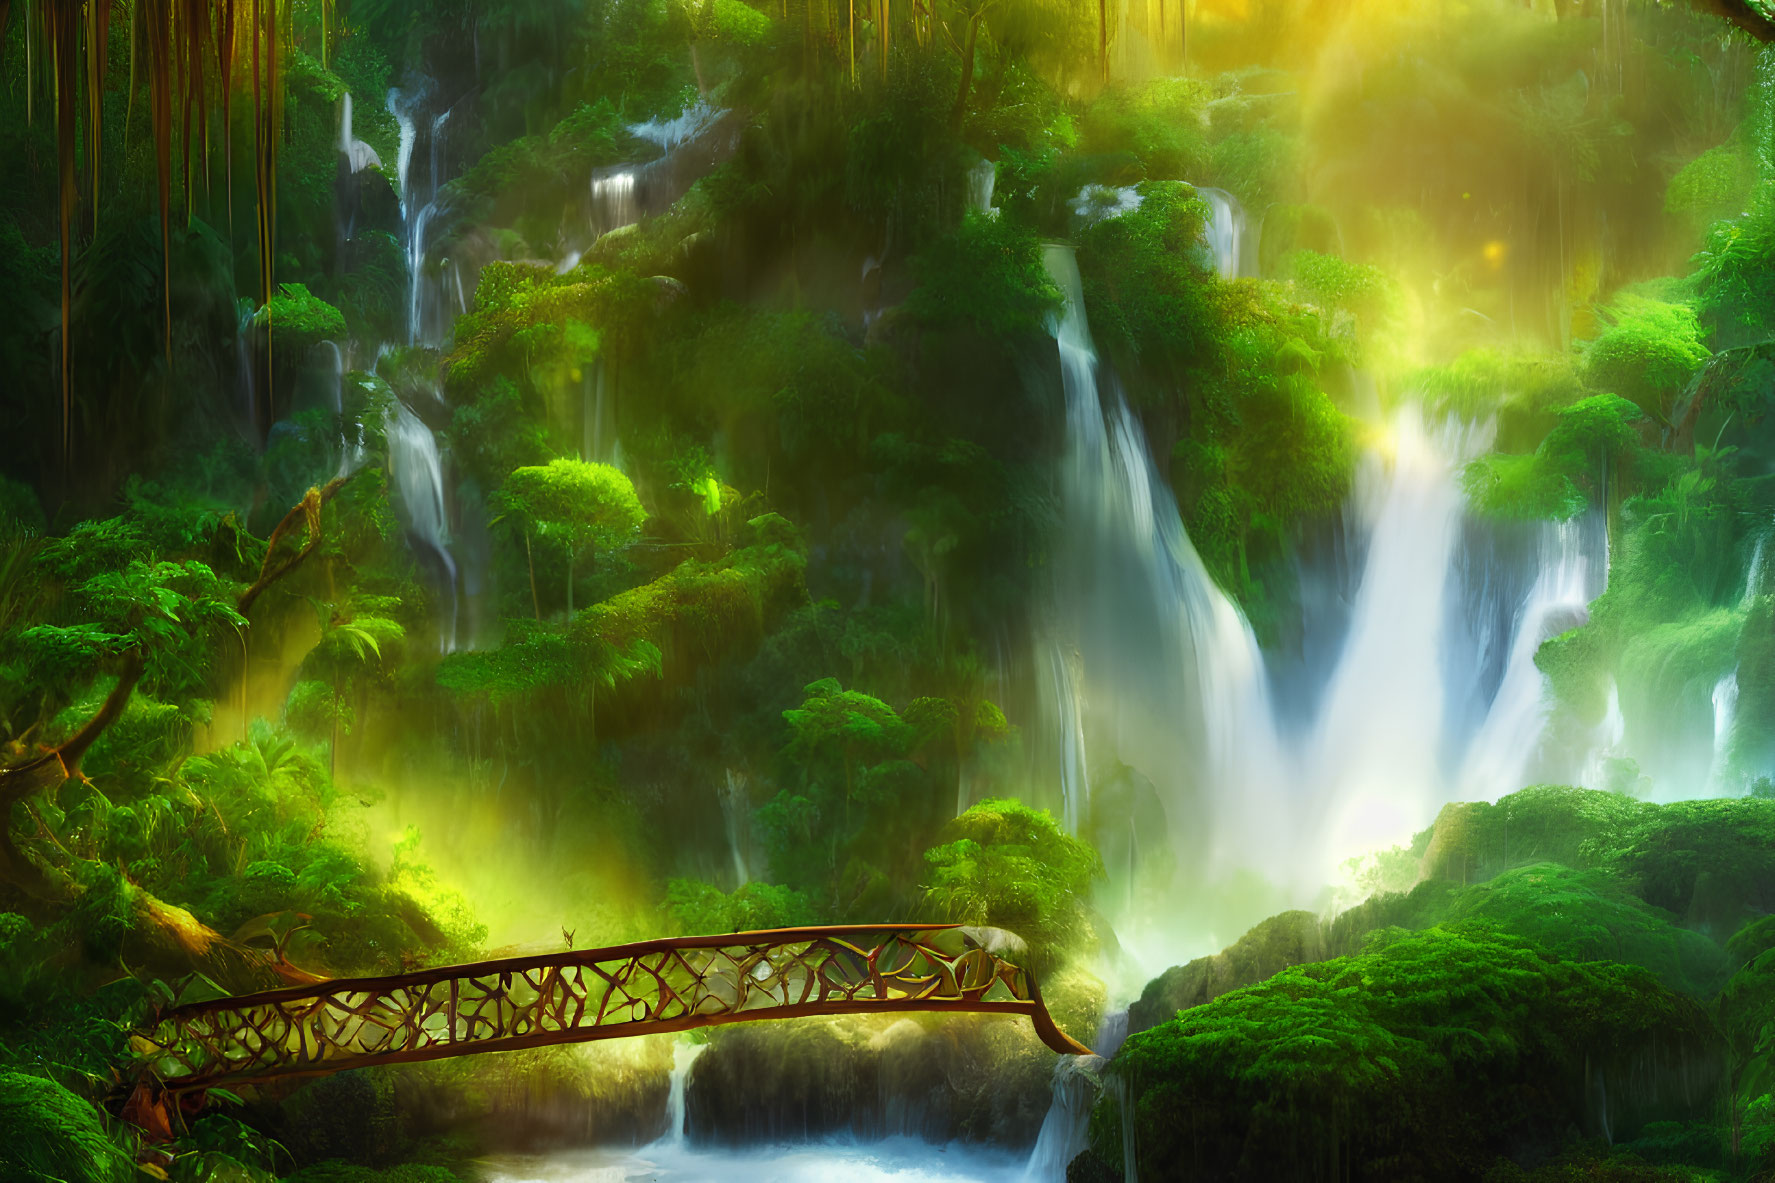 Serene forest scene with waterfalls, sunlight, and wooden bridge